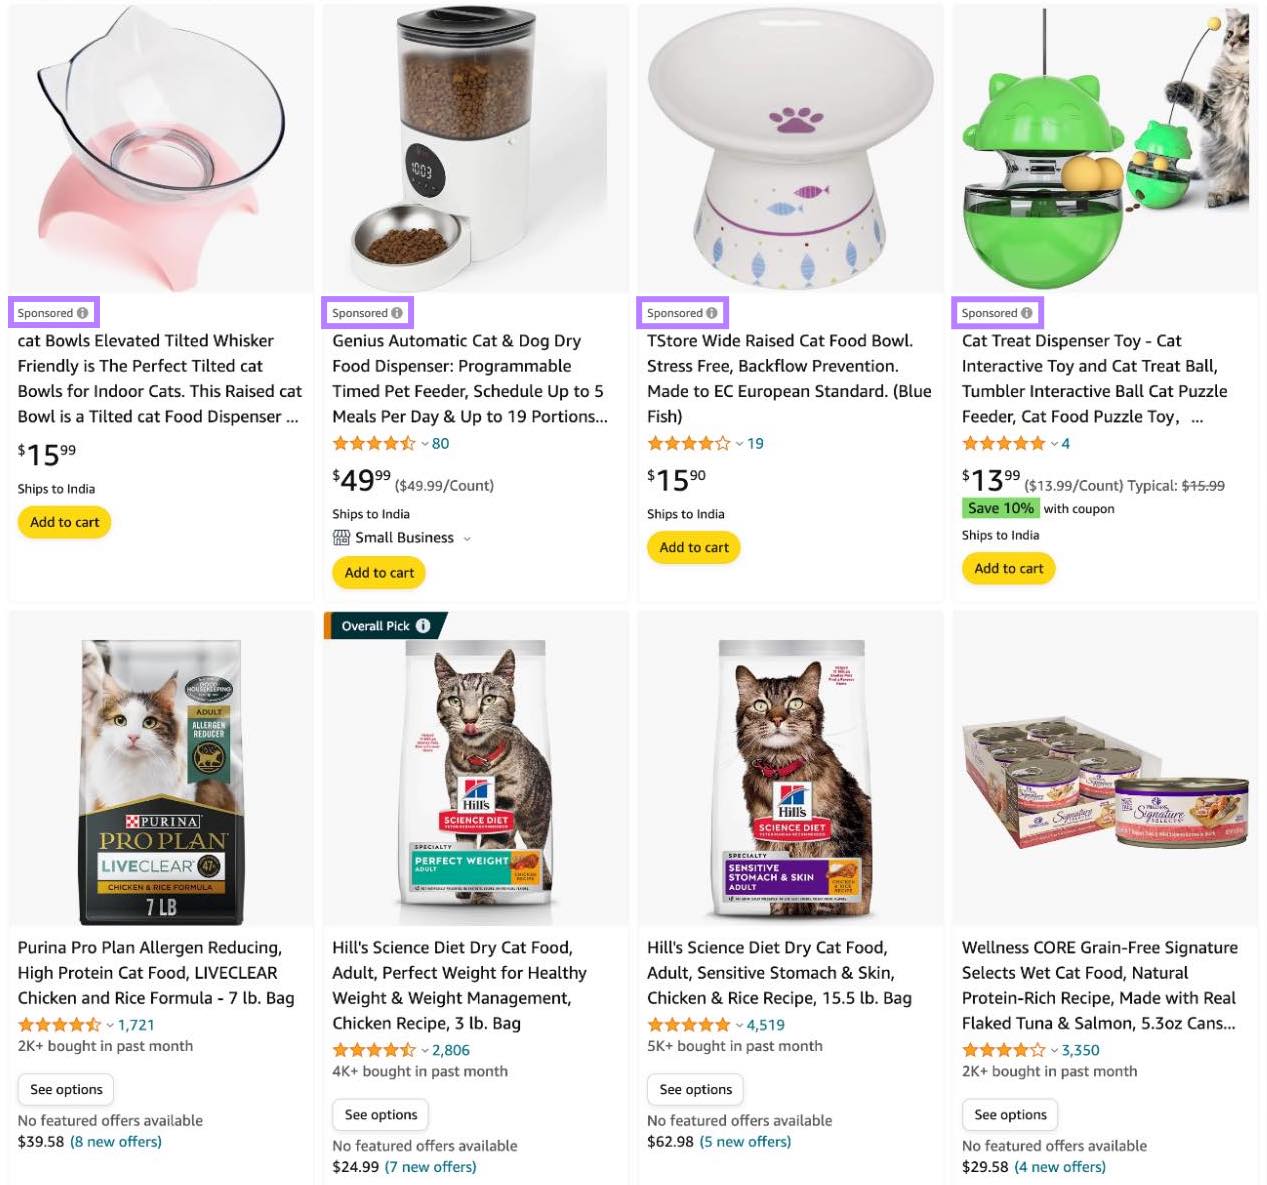 examples of promoted listings on Amazon, with "Sponsored" labels highlighted